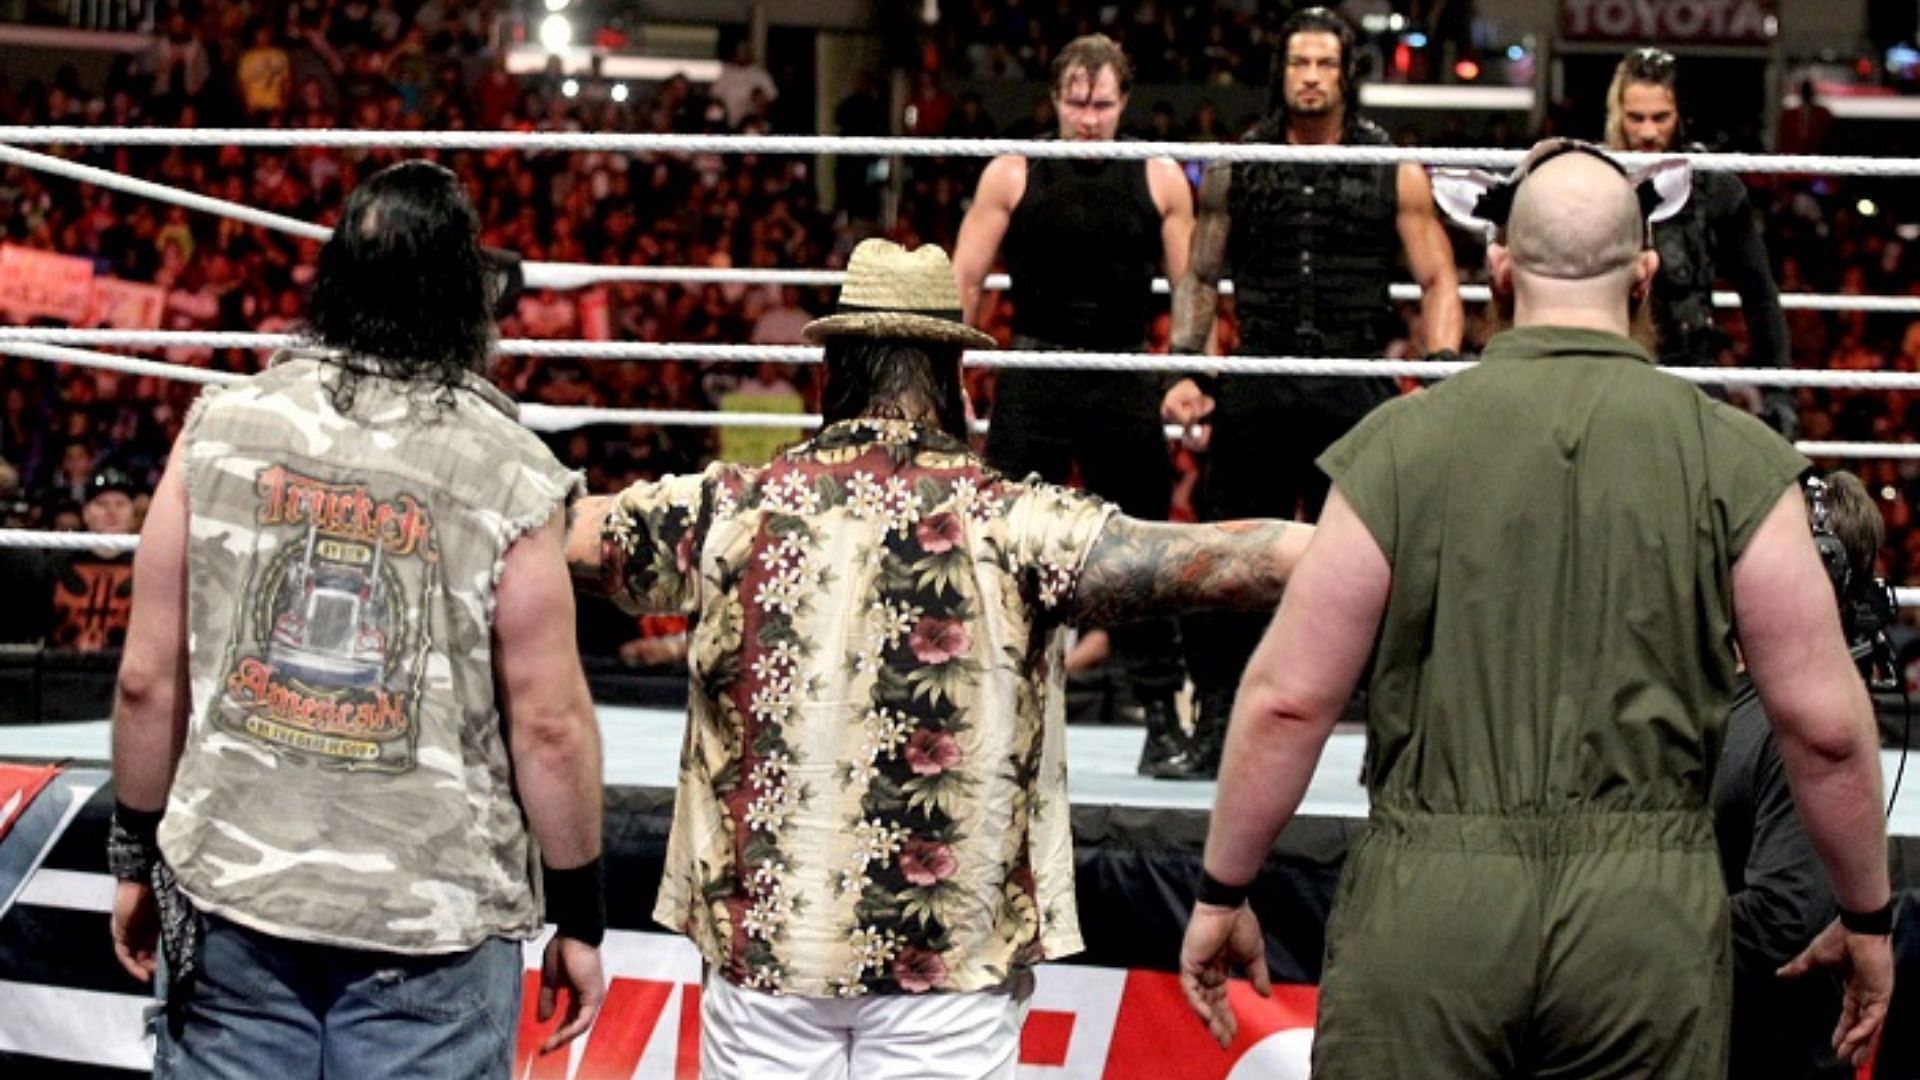 Faction warfare is a common WWE-style of storytelling.